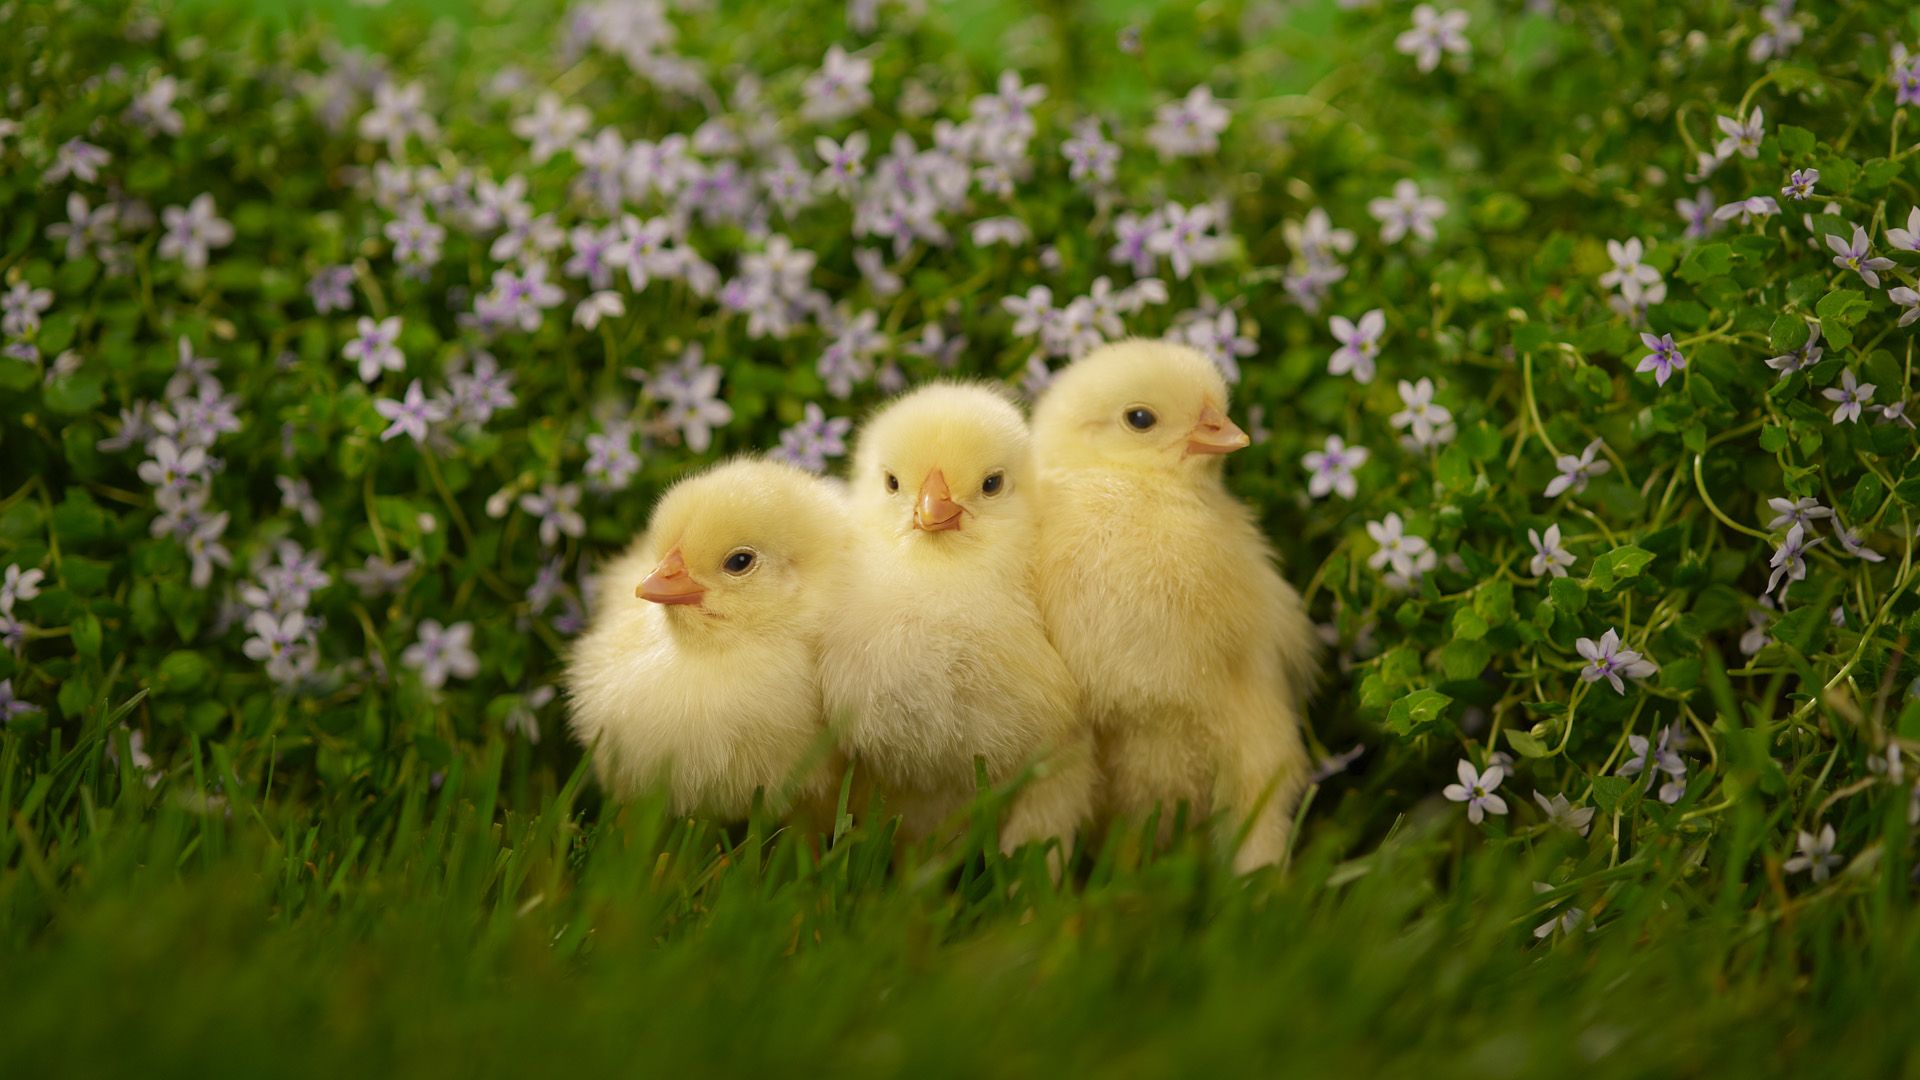 Chicken Baby Cute Animal wallpapers